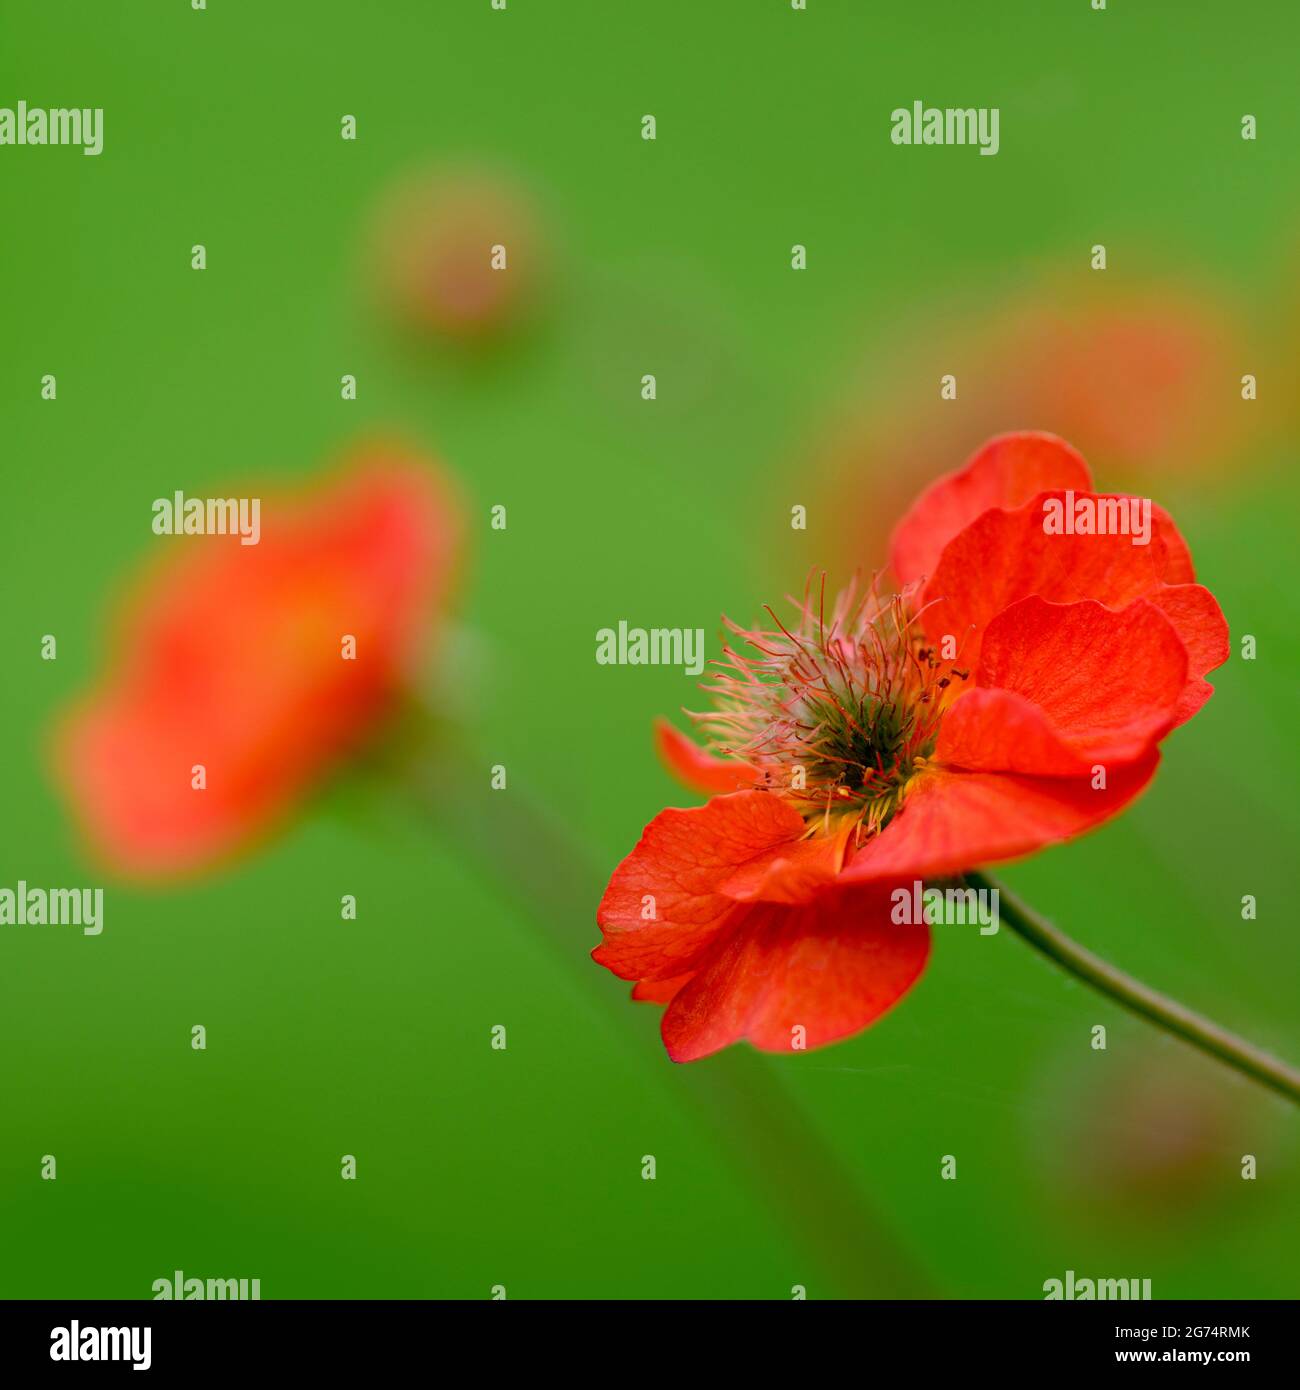 A small clump of red Geum flowers photographed against an out of focus green foliage background Stock Photo